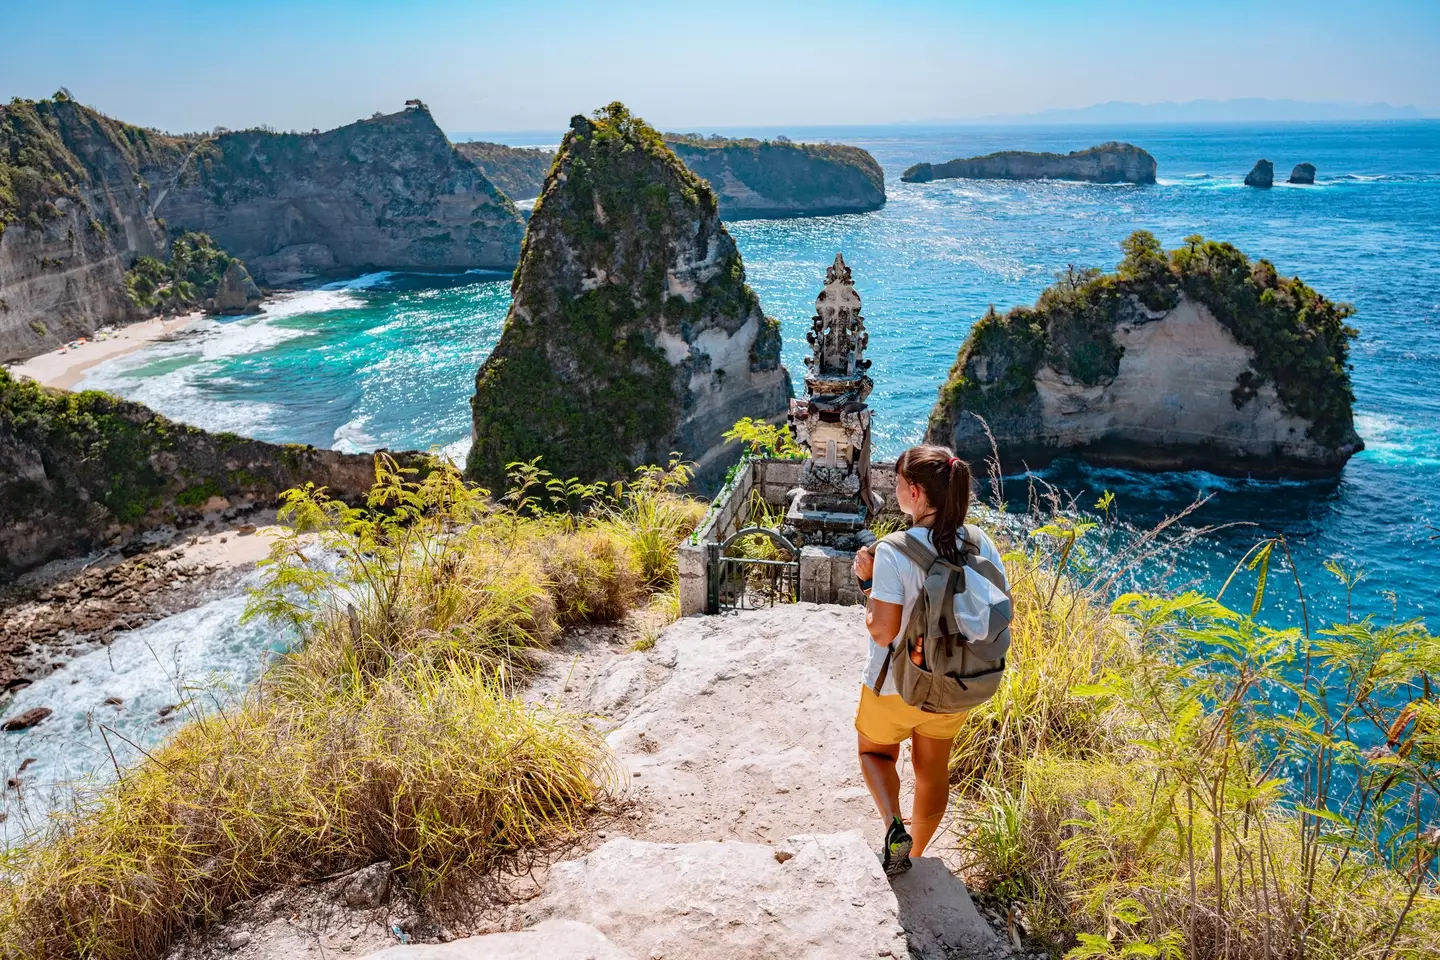 Stunning views on Bali (Getty Stock Images)